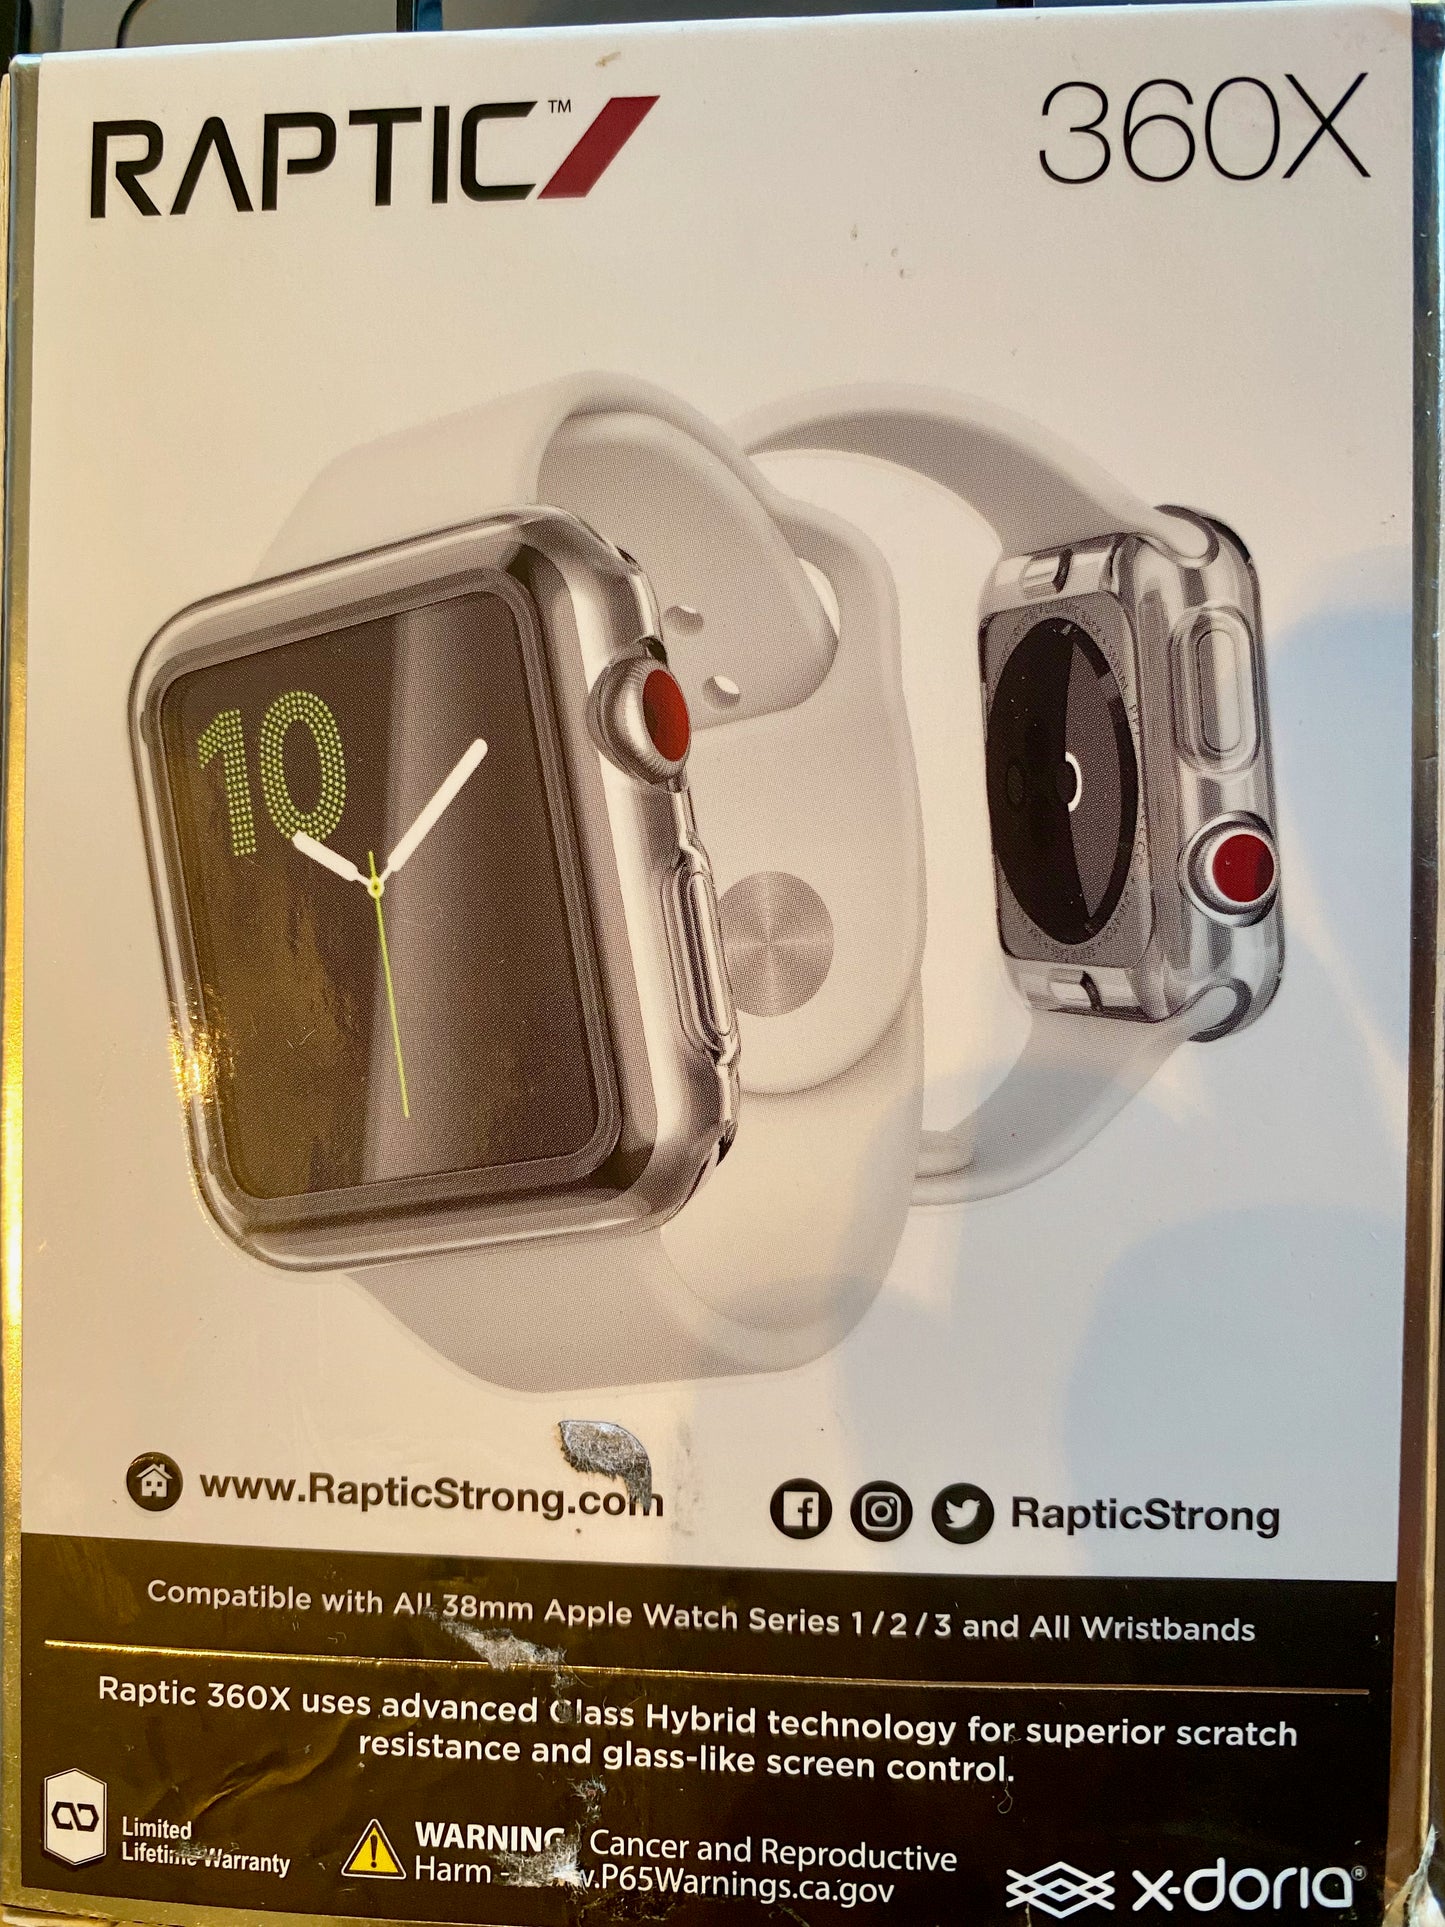 NEW Raptic 360X 38mm Glass Hybrid Protector with Rubber Bumper for Apple Watch